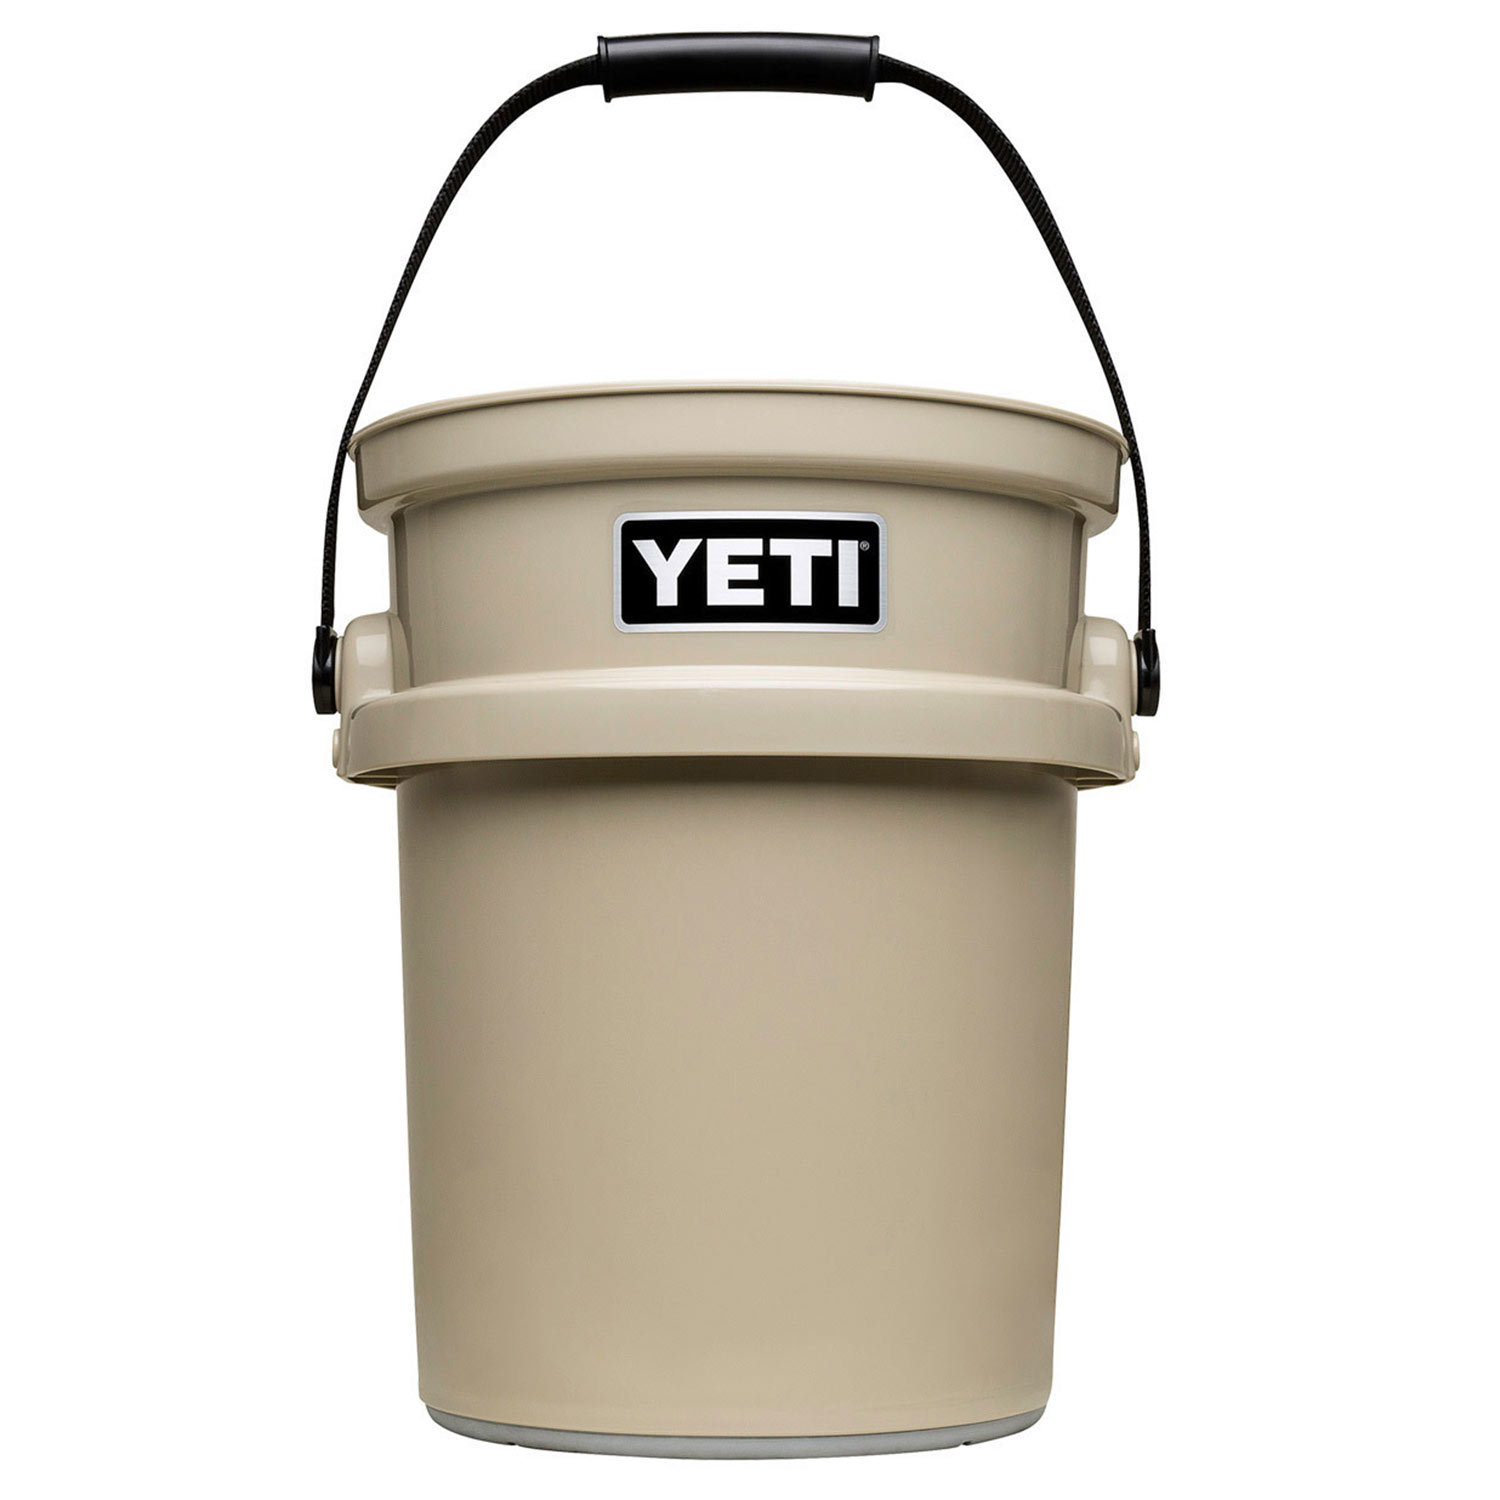 Yeti LoadOut Bucket - 5 Gallon and Accessories 